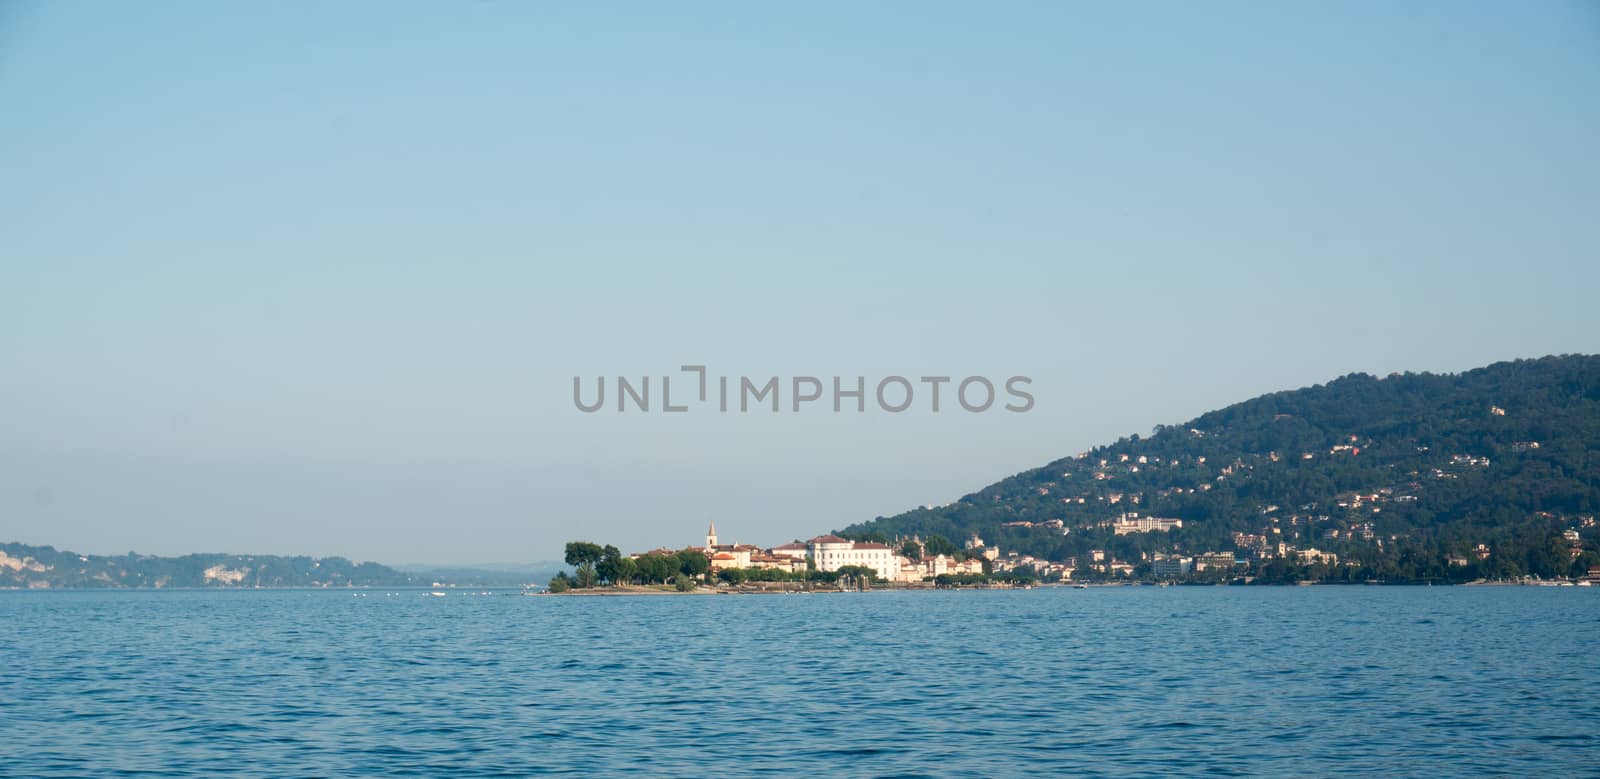 Summer resort on lago maggiore in north italy lombardy province